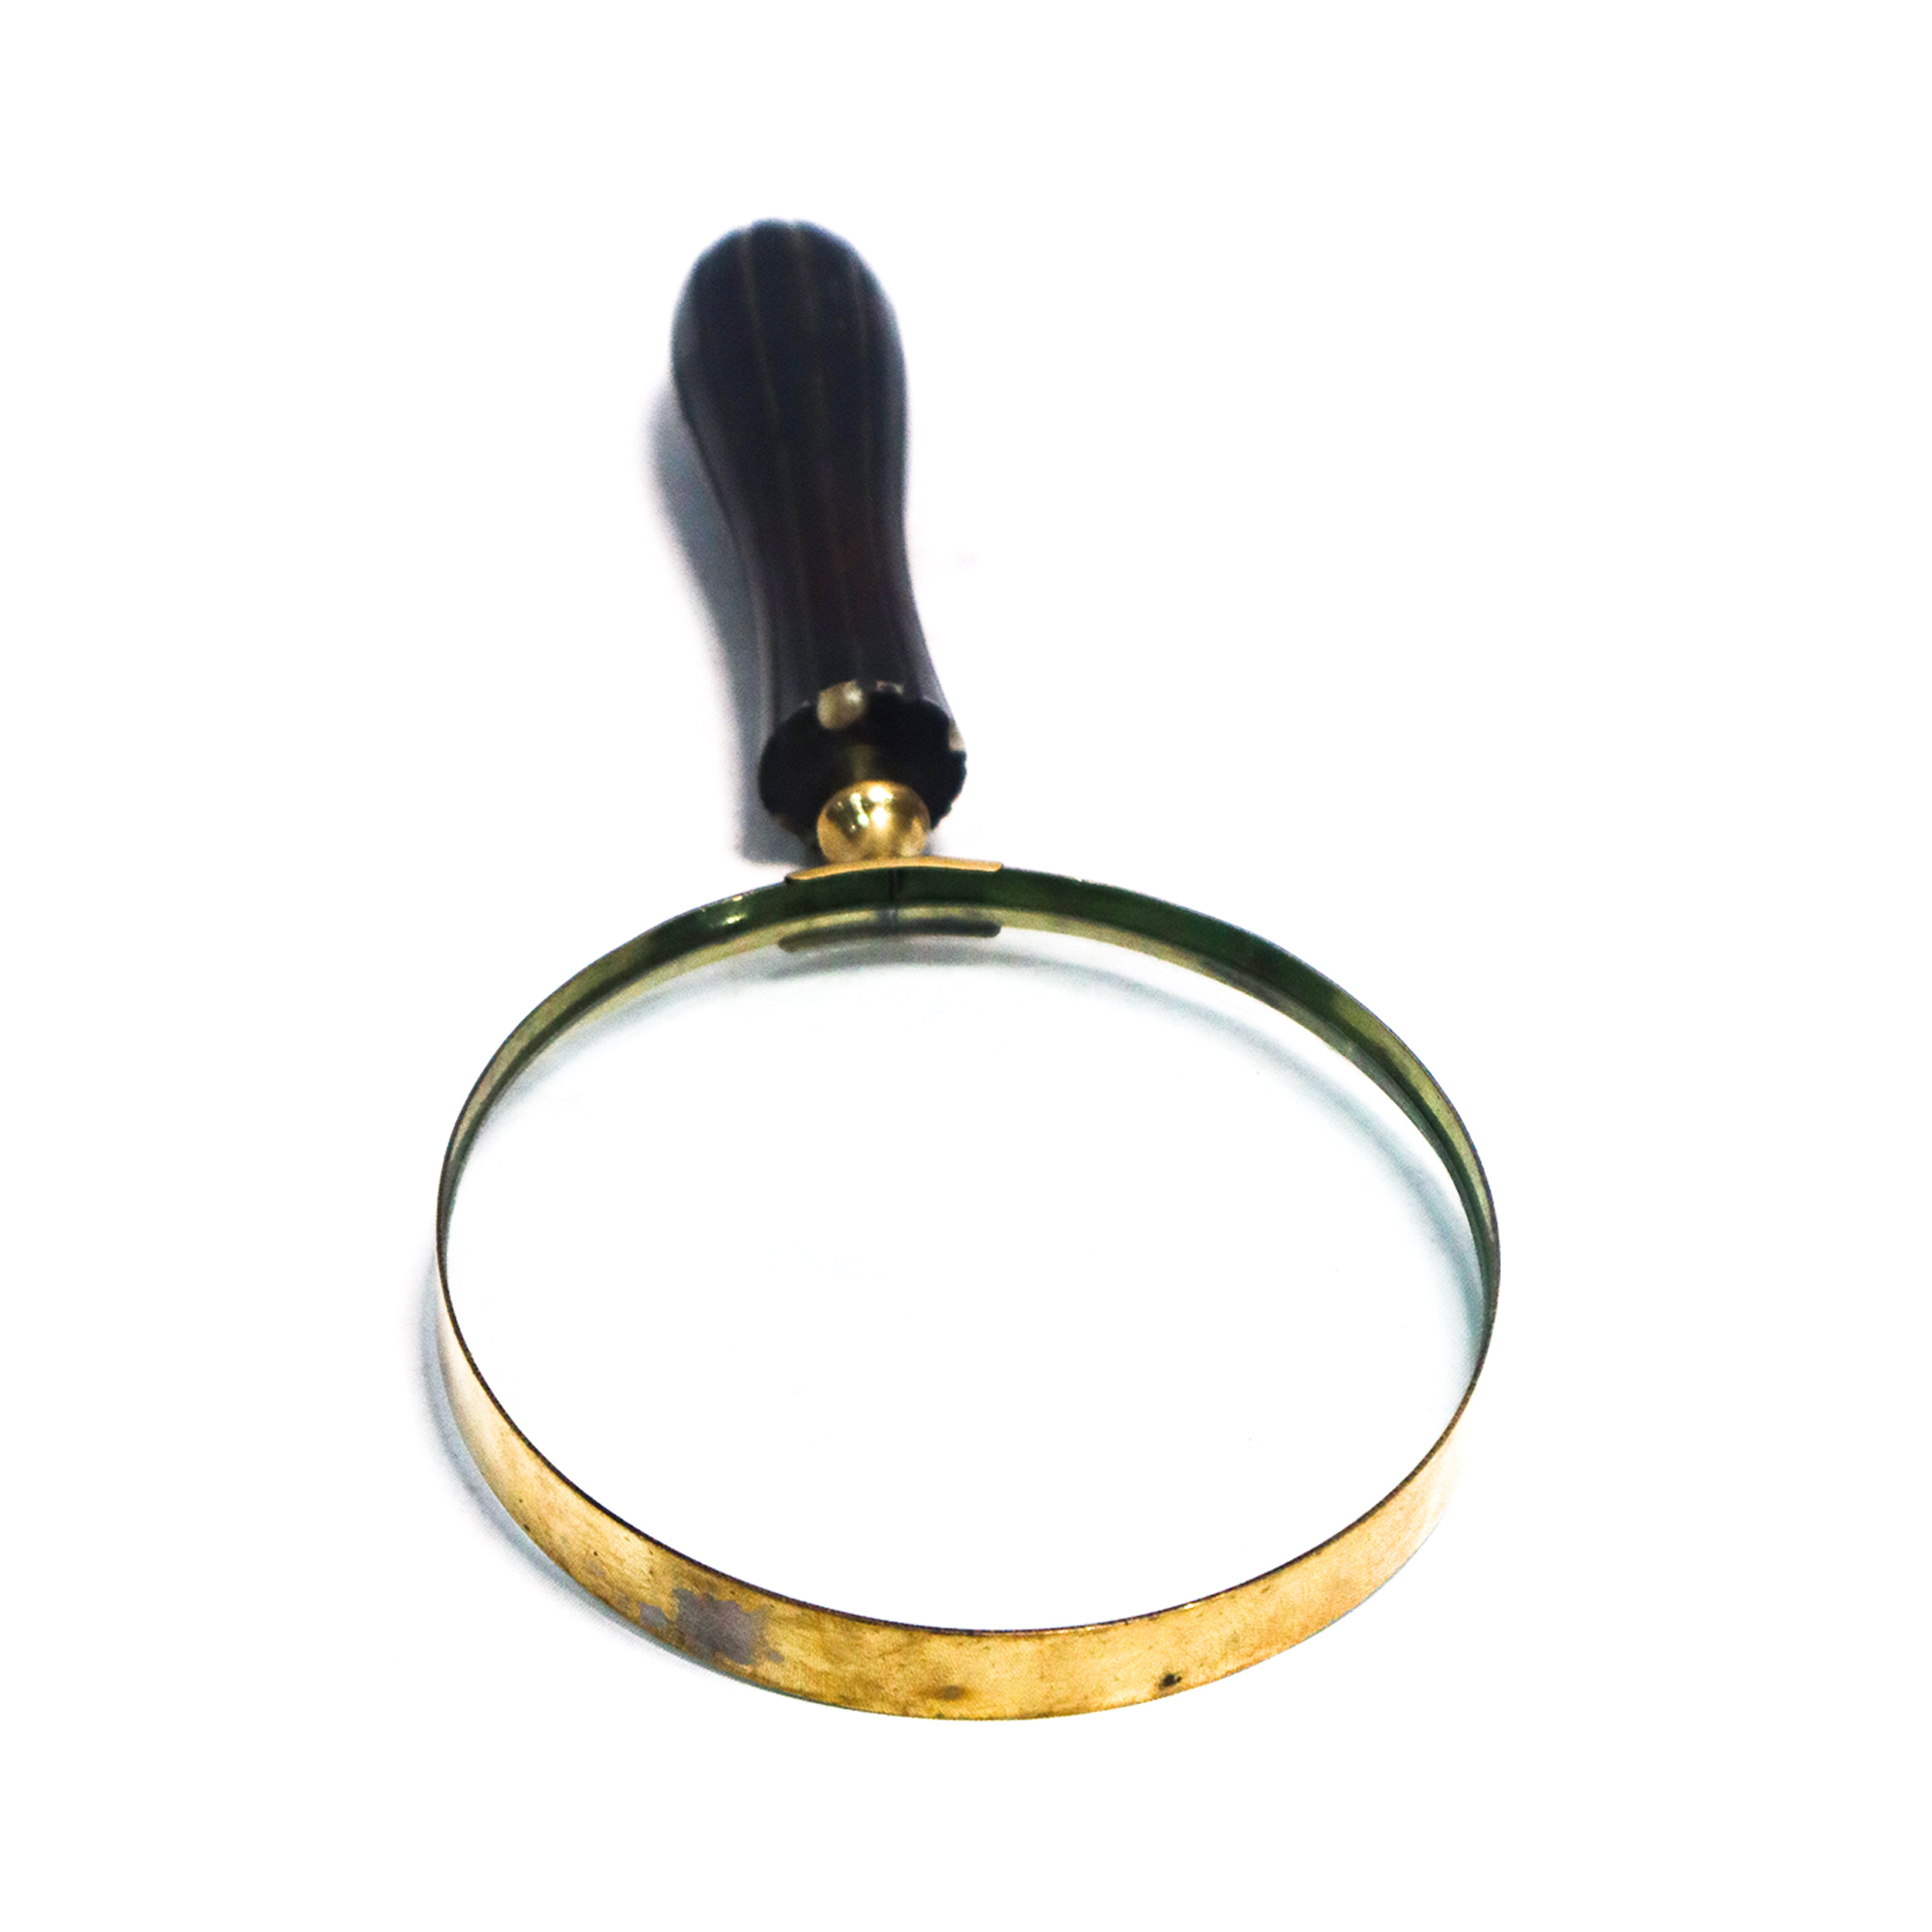 Brass Magnifying Glass Magnifier WithBeautiful Handle Nautical Magnifying Glass